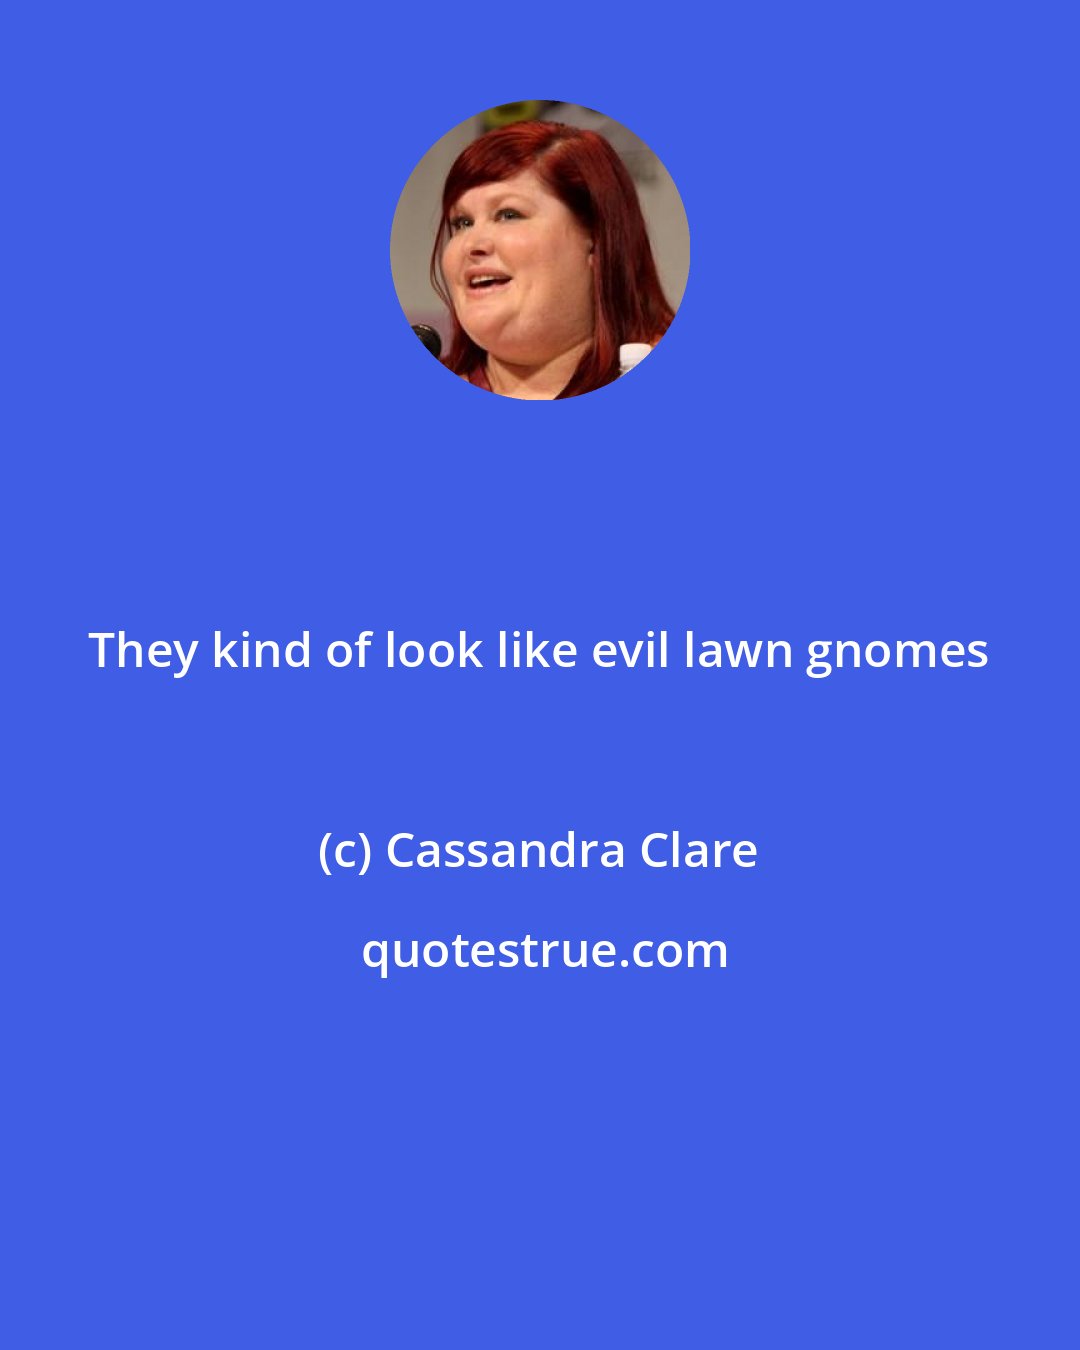 Cassandra Clare: They kind of look like evil lawn gnomes